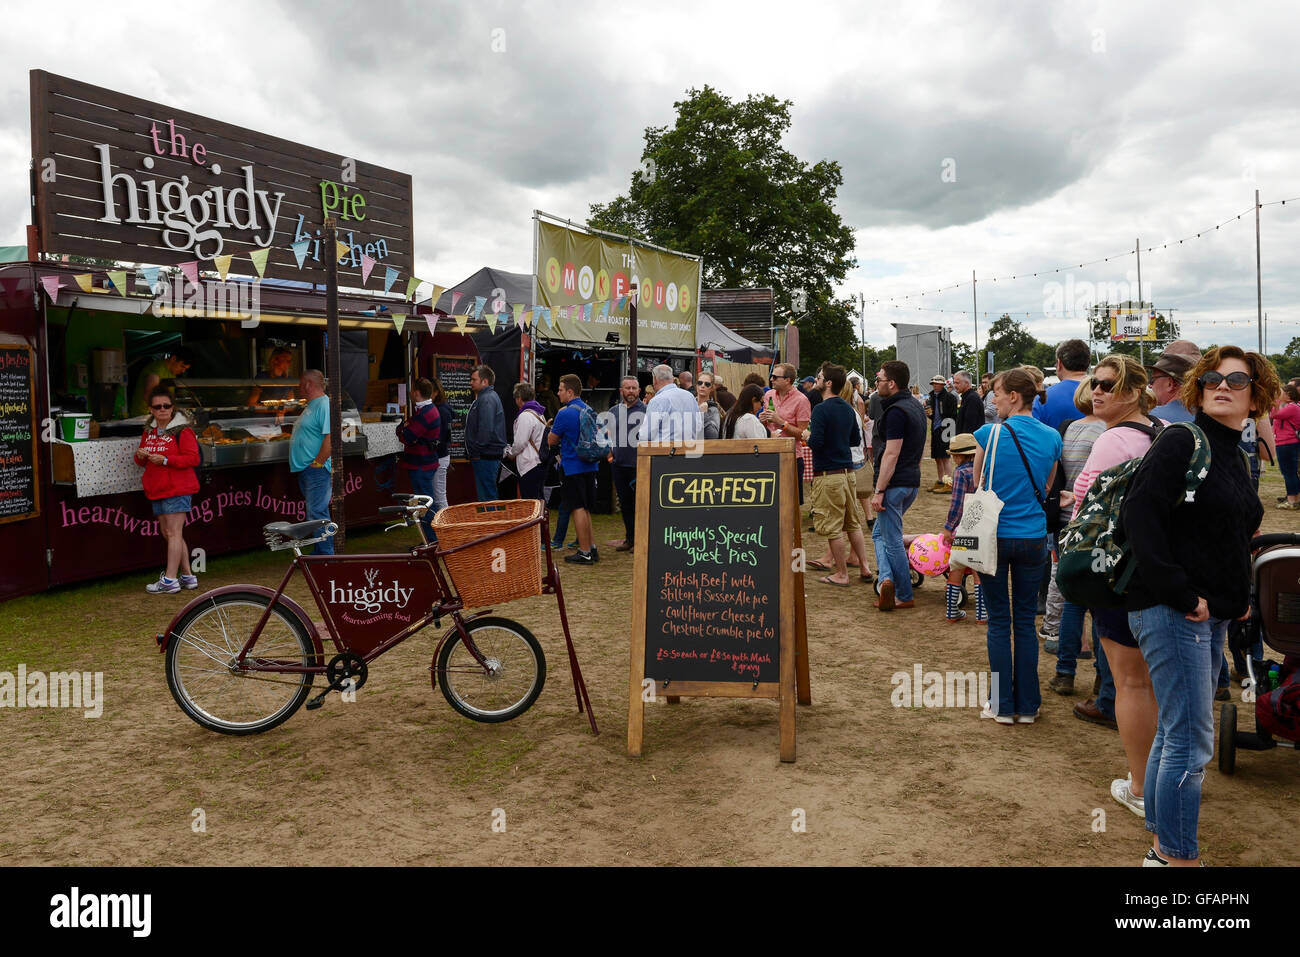 Carfest North, Bolesworth, Cheshire, UK. 30th July 2016. People queueing at one of the many food stalls. The event is the brainchild of Chris Evans and features 3 days of cars, music and entertainment with profits being donated to the charity Children in Need. Andrew Paterson/Alamy Live News Stock Photo